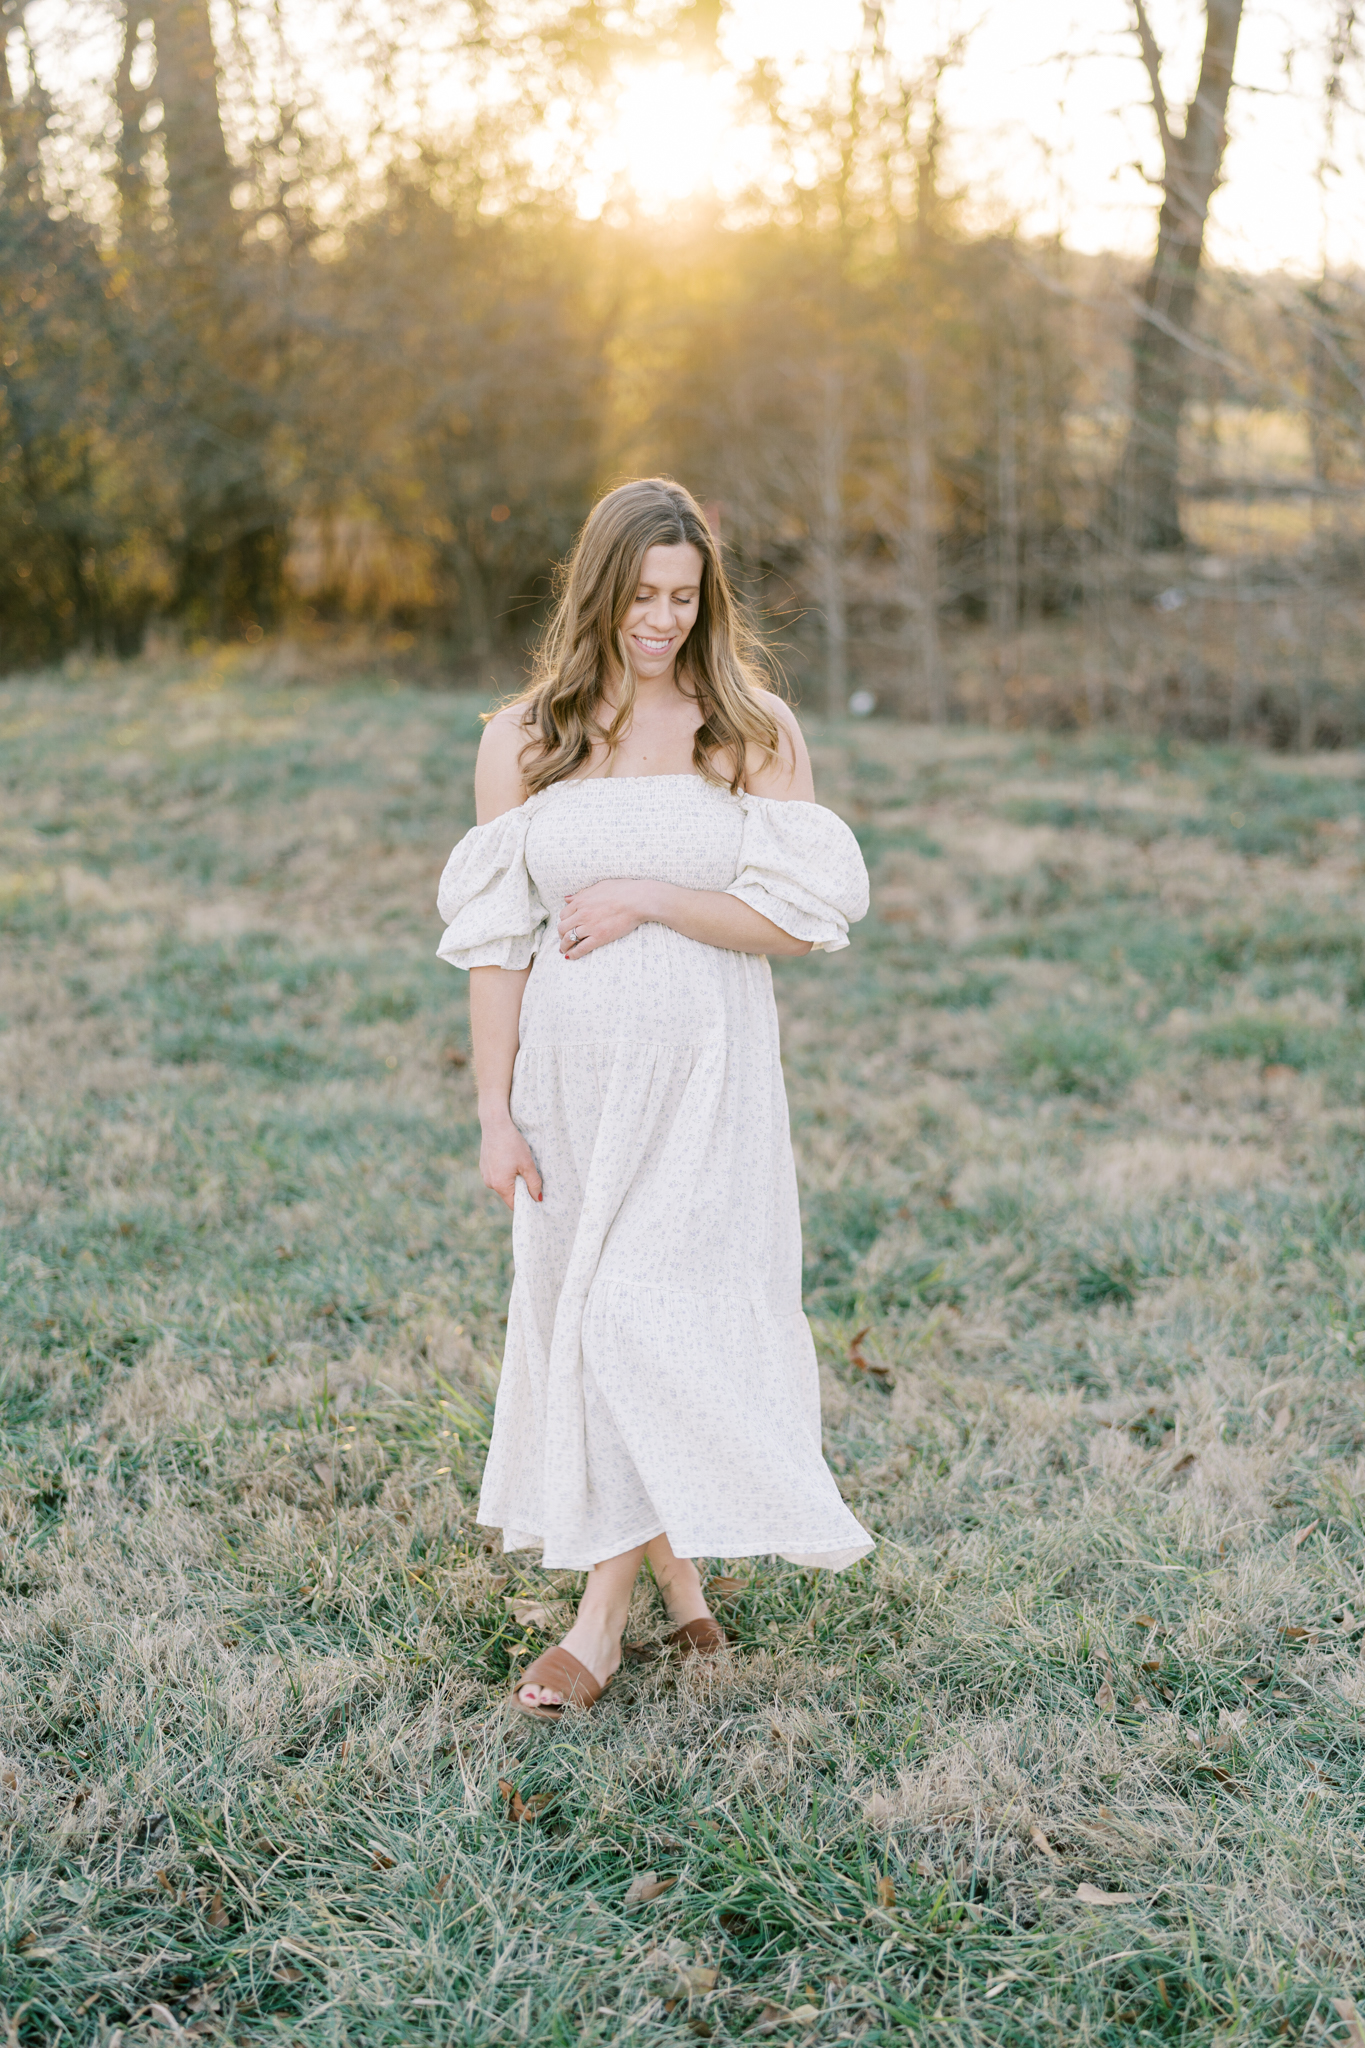 Pregnant woman in dress walking in a field at sunset